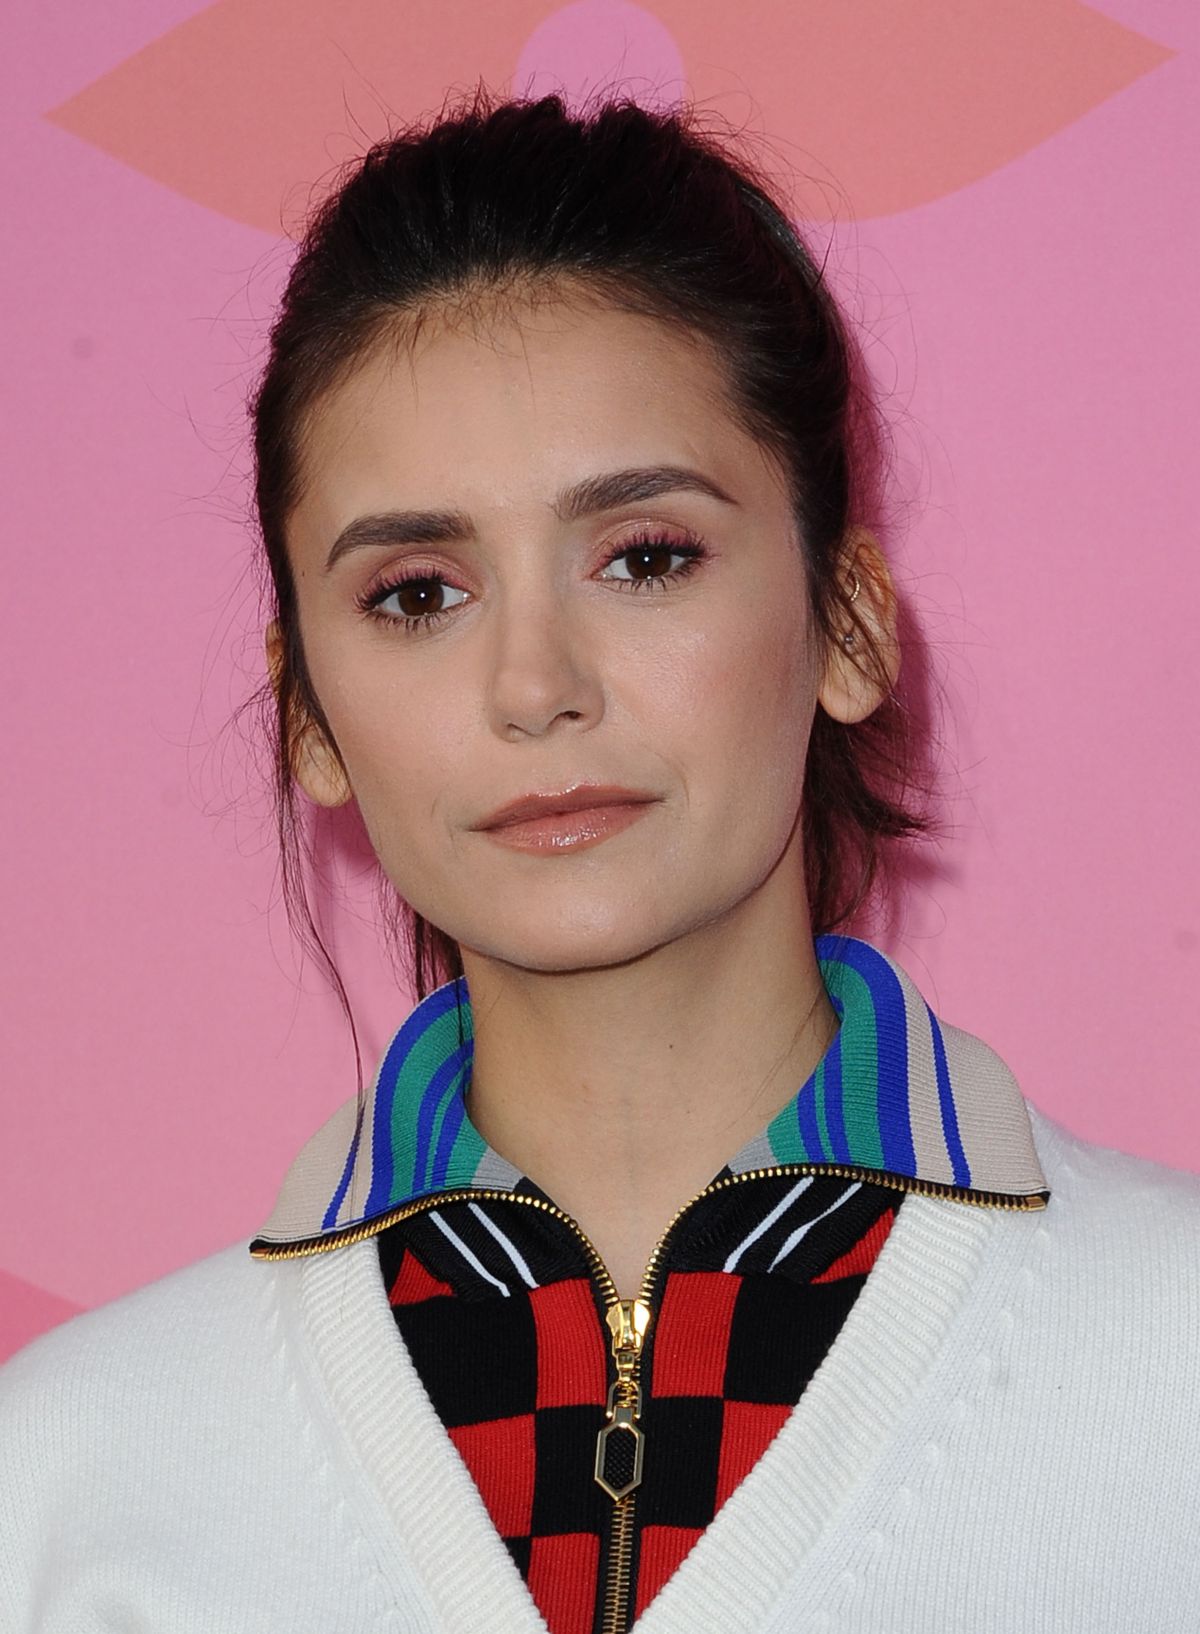 NINA DOBREV at Louis Vuitton x Cocktail Party in Los Angeles 06/27/2019 – HawtCelebs